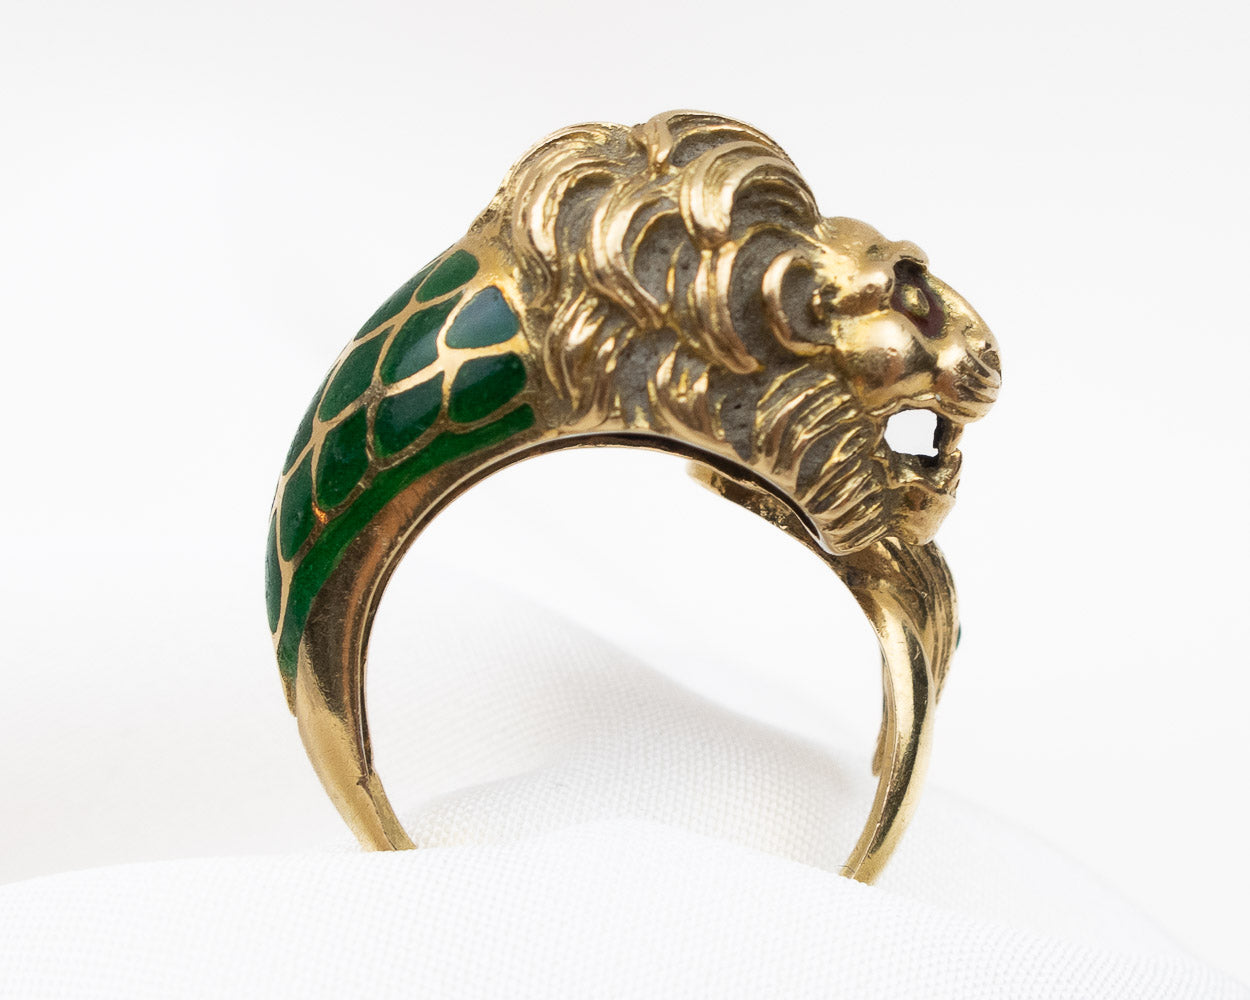 I22056 1960 18KT GOLD LION RING WITH ENAMEL ACCENTS